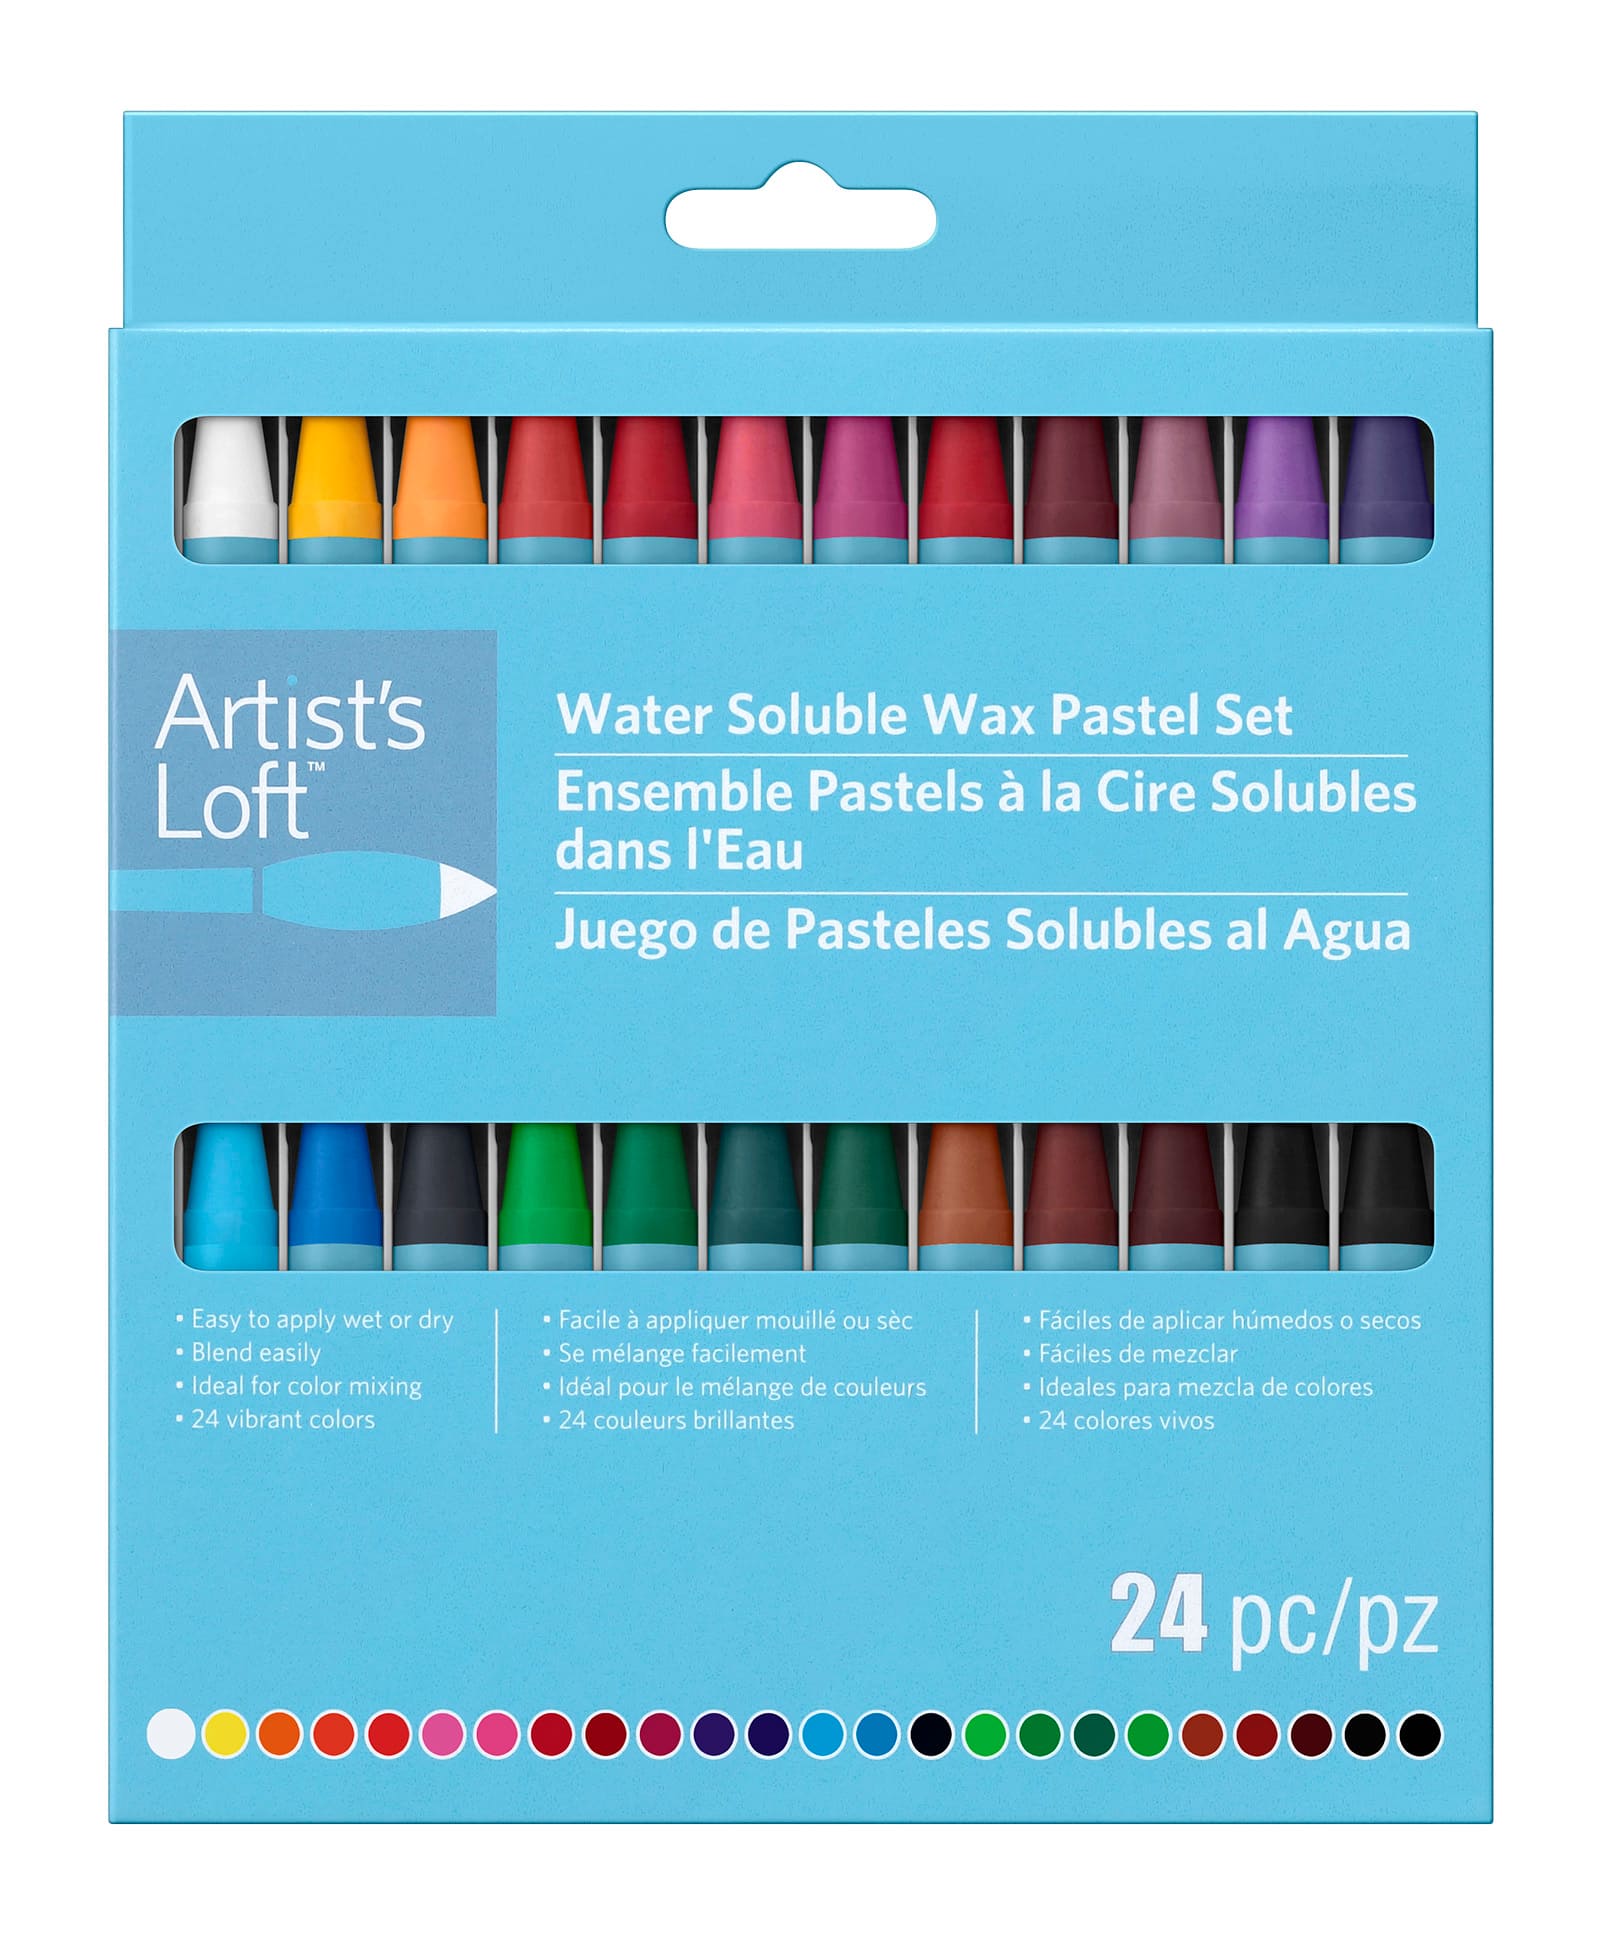 8 Packs: 24 ct. (192 total) Water Soluble Wax Pastels by Artist's